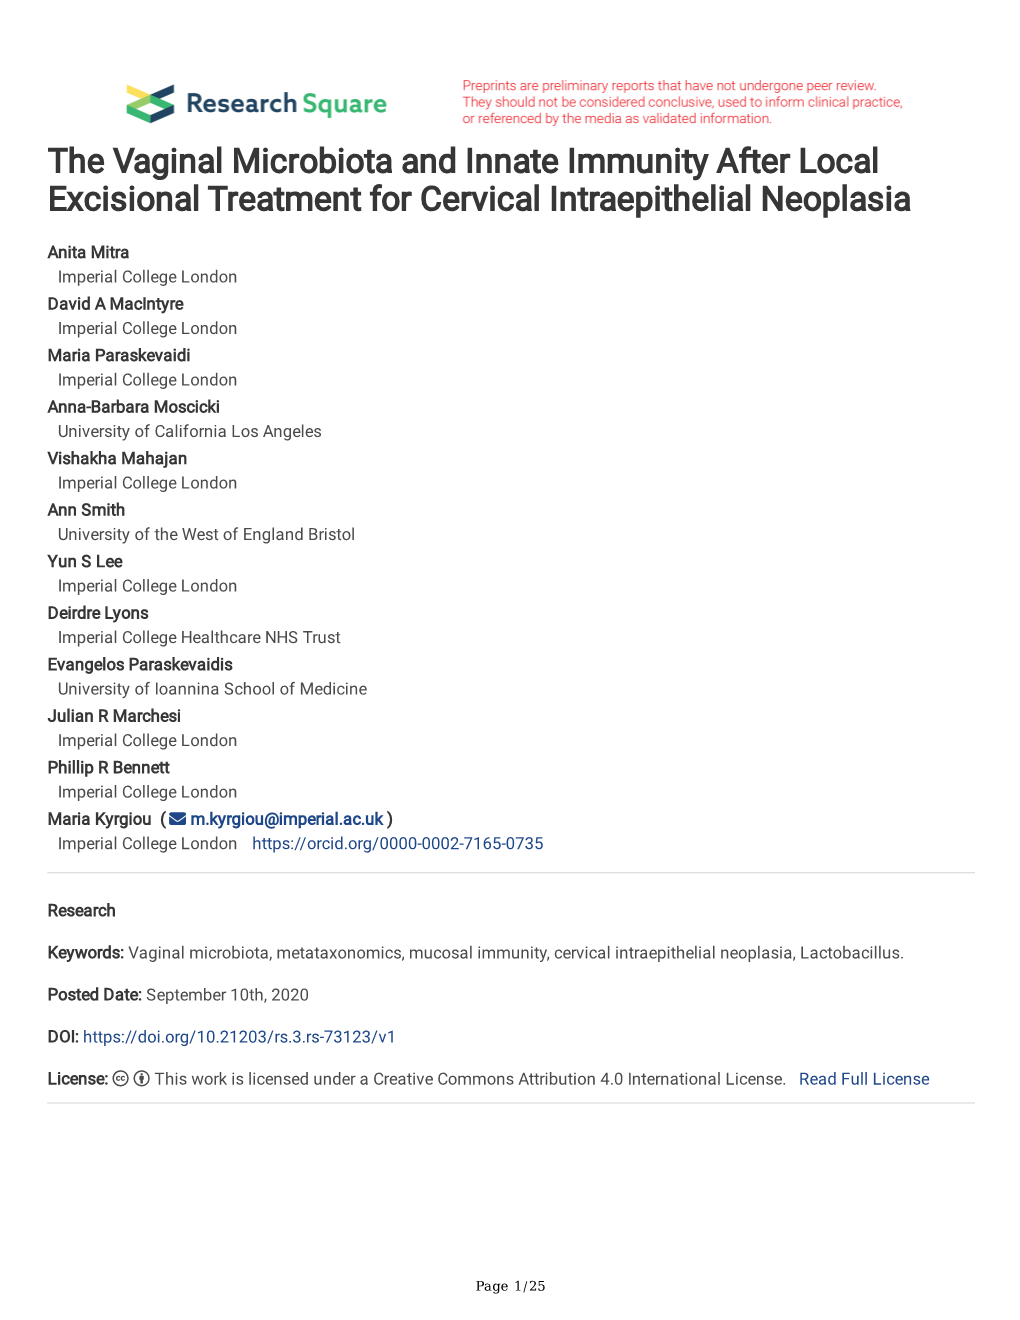 The Vaginal Microbiota and Innate Immunity After Local Excisional Treatment for Cervical Intraepithelial Neoplasia